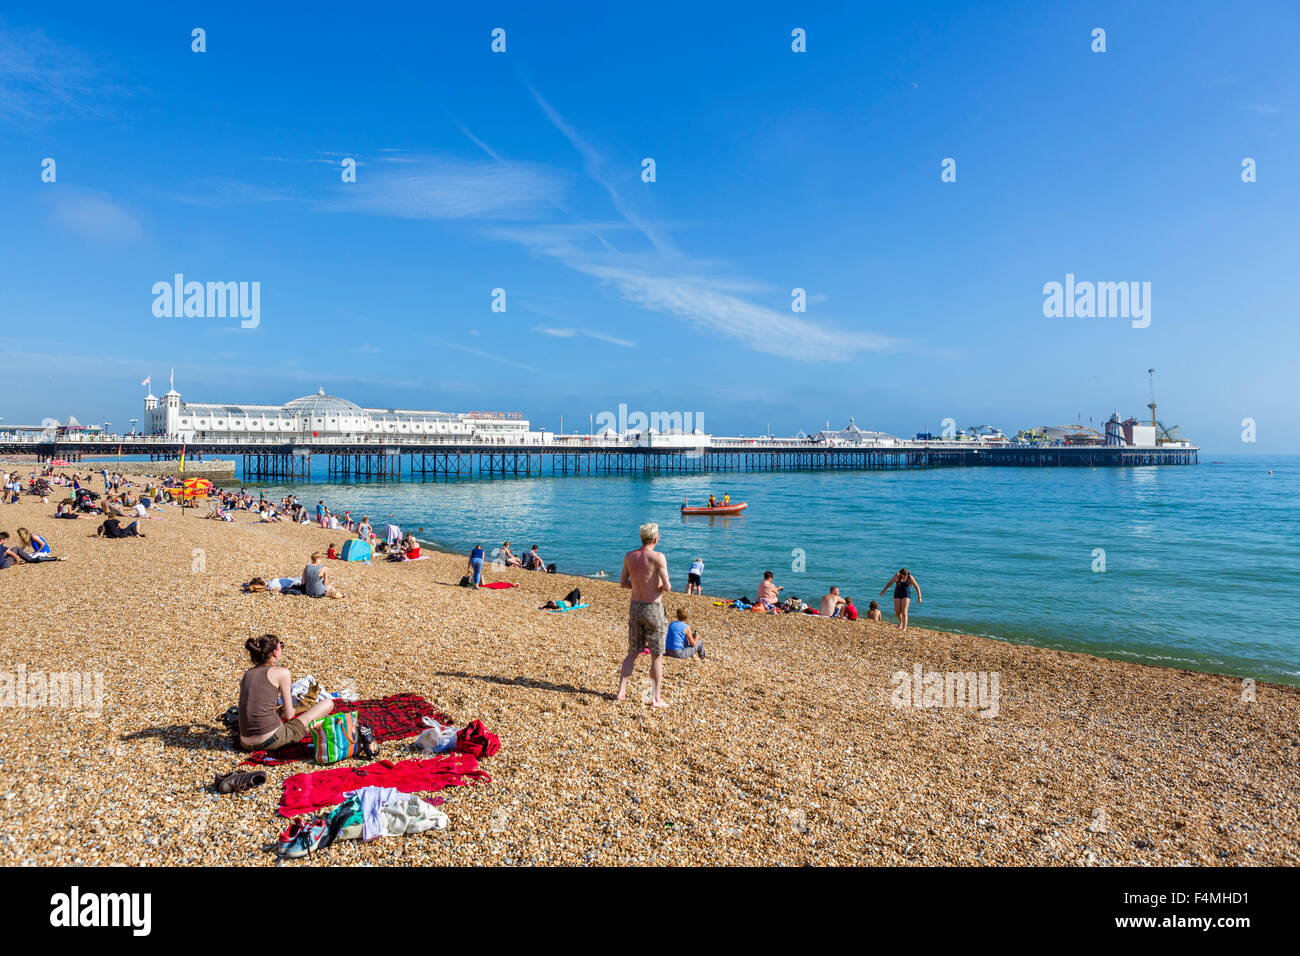 Brighton beach, Brighton, Sussex. The beach and pier in late afternoon sunshine, Brighton, East Sussex, England, UK Stock Photo